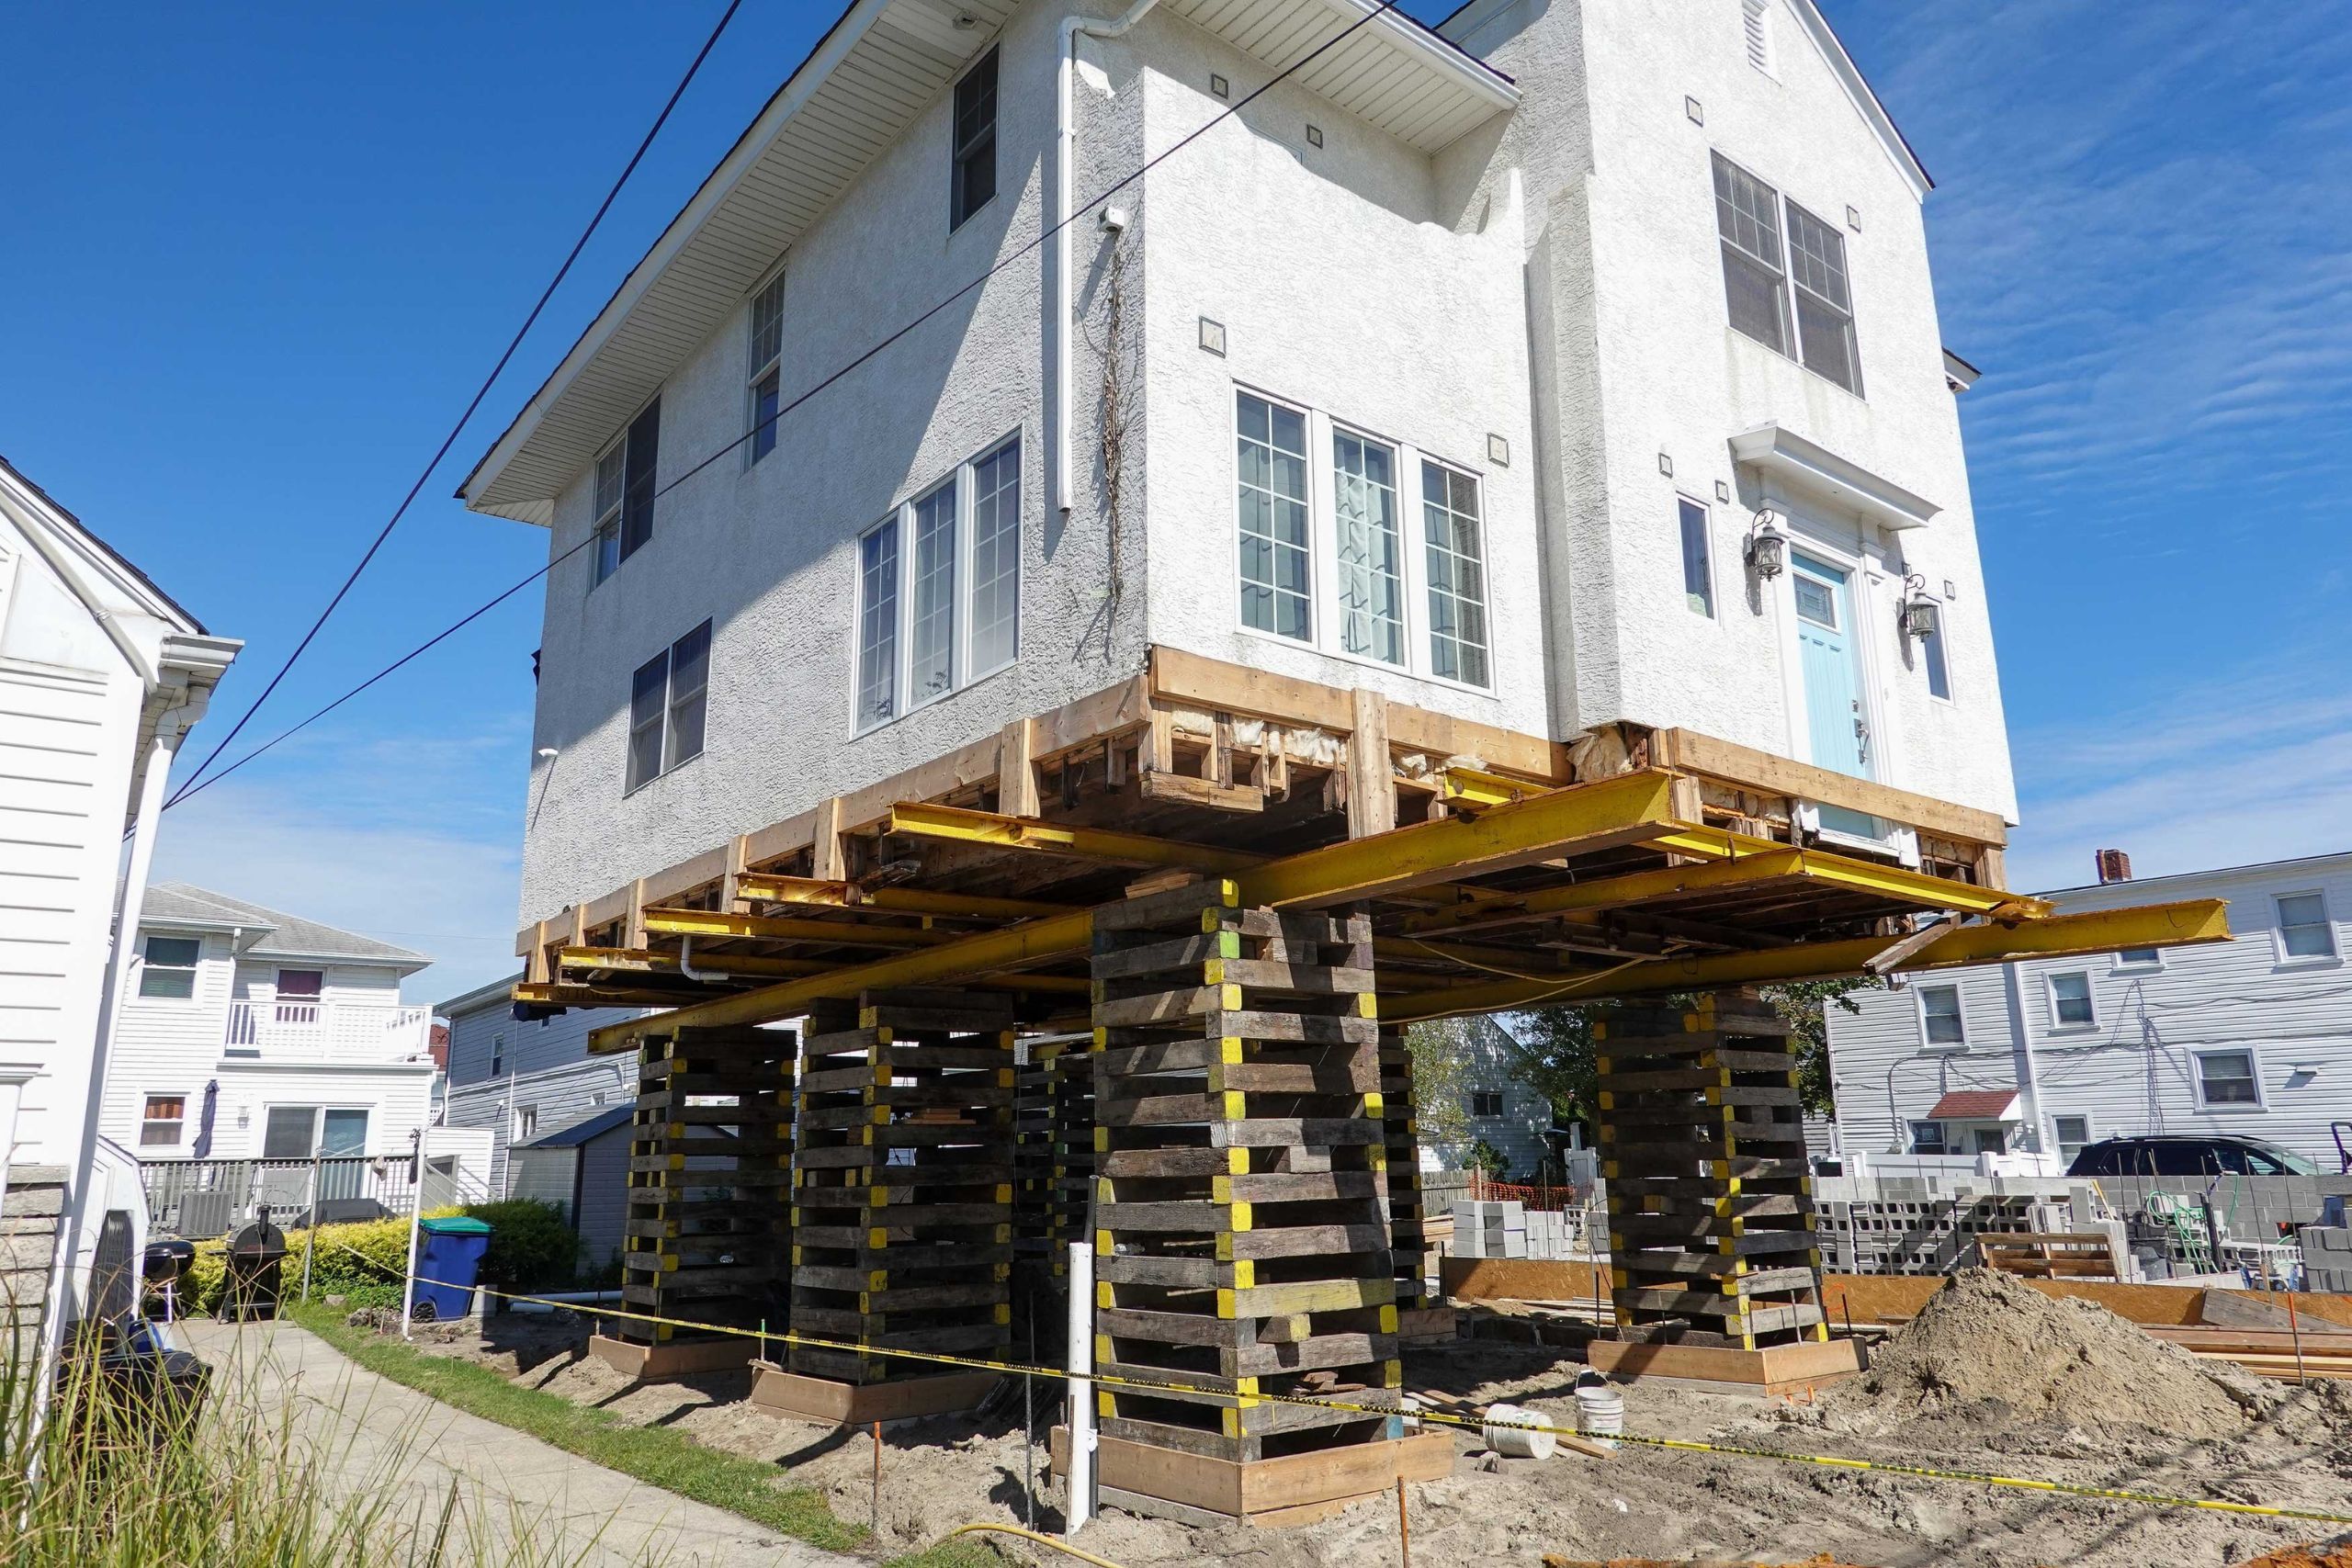 Located in Bradenton, Florida, we are a company that specializes in house lifting, small distance house moving, piles and foundations.